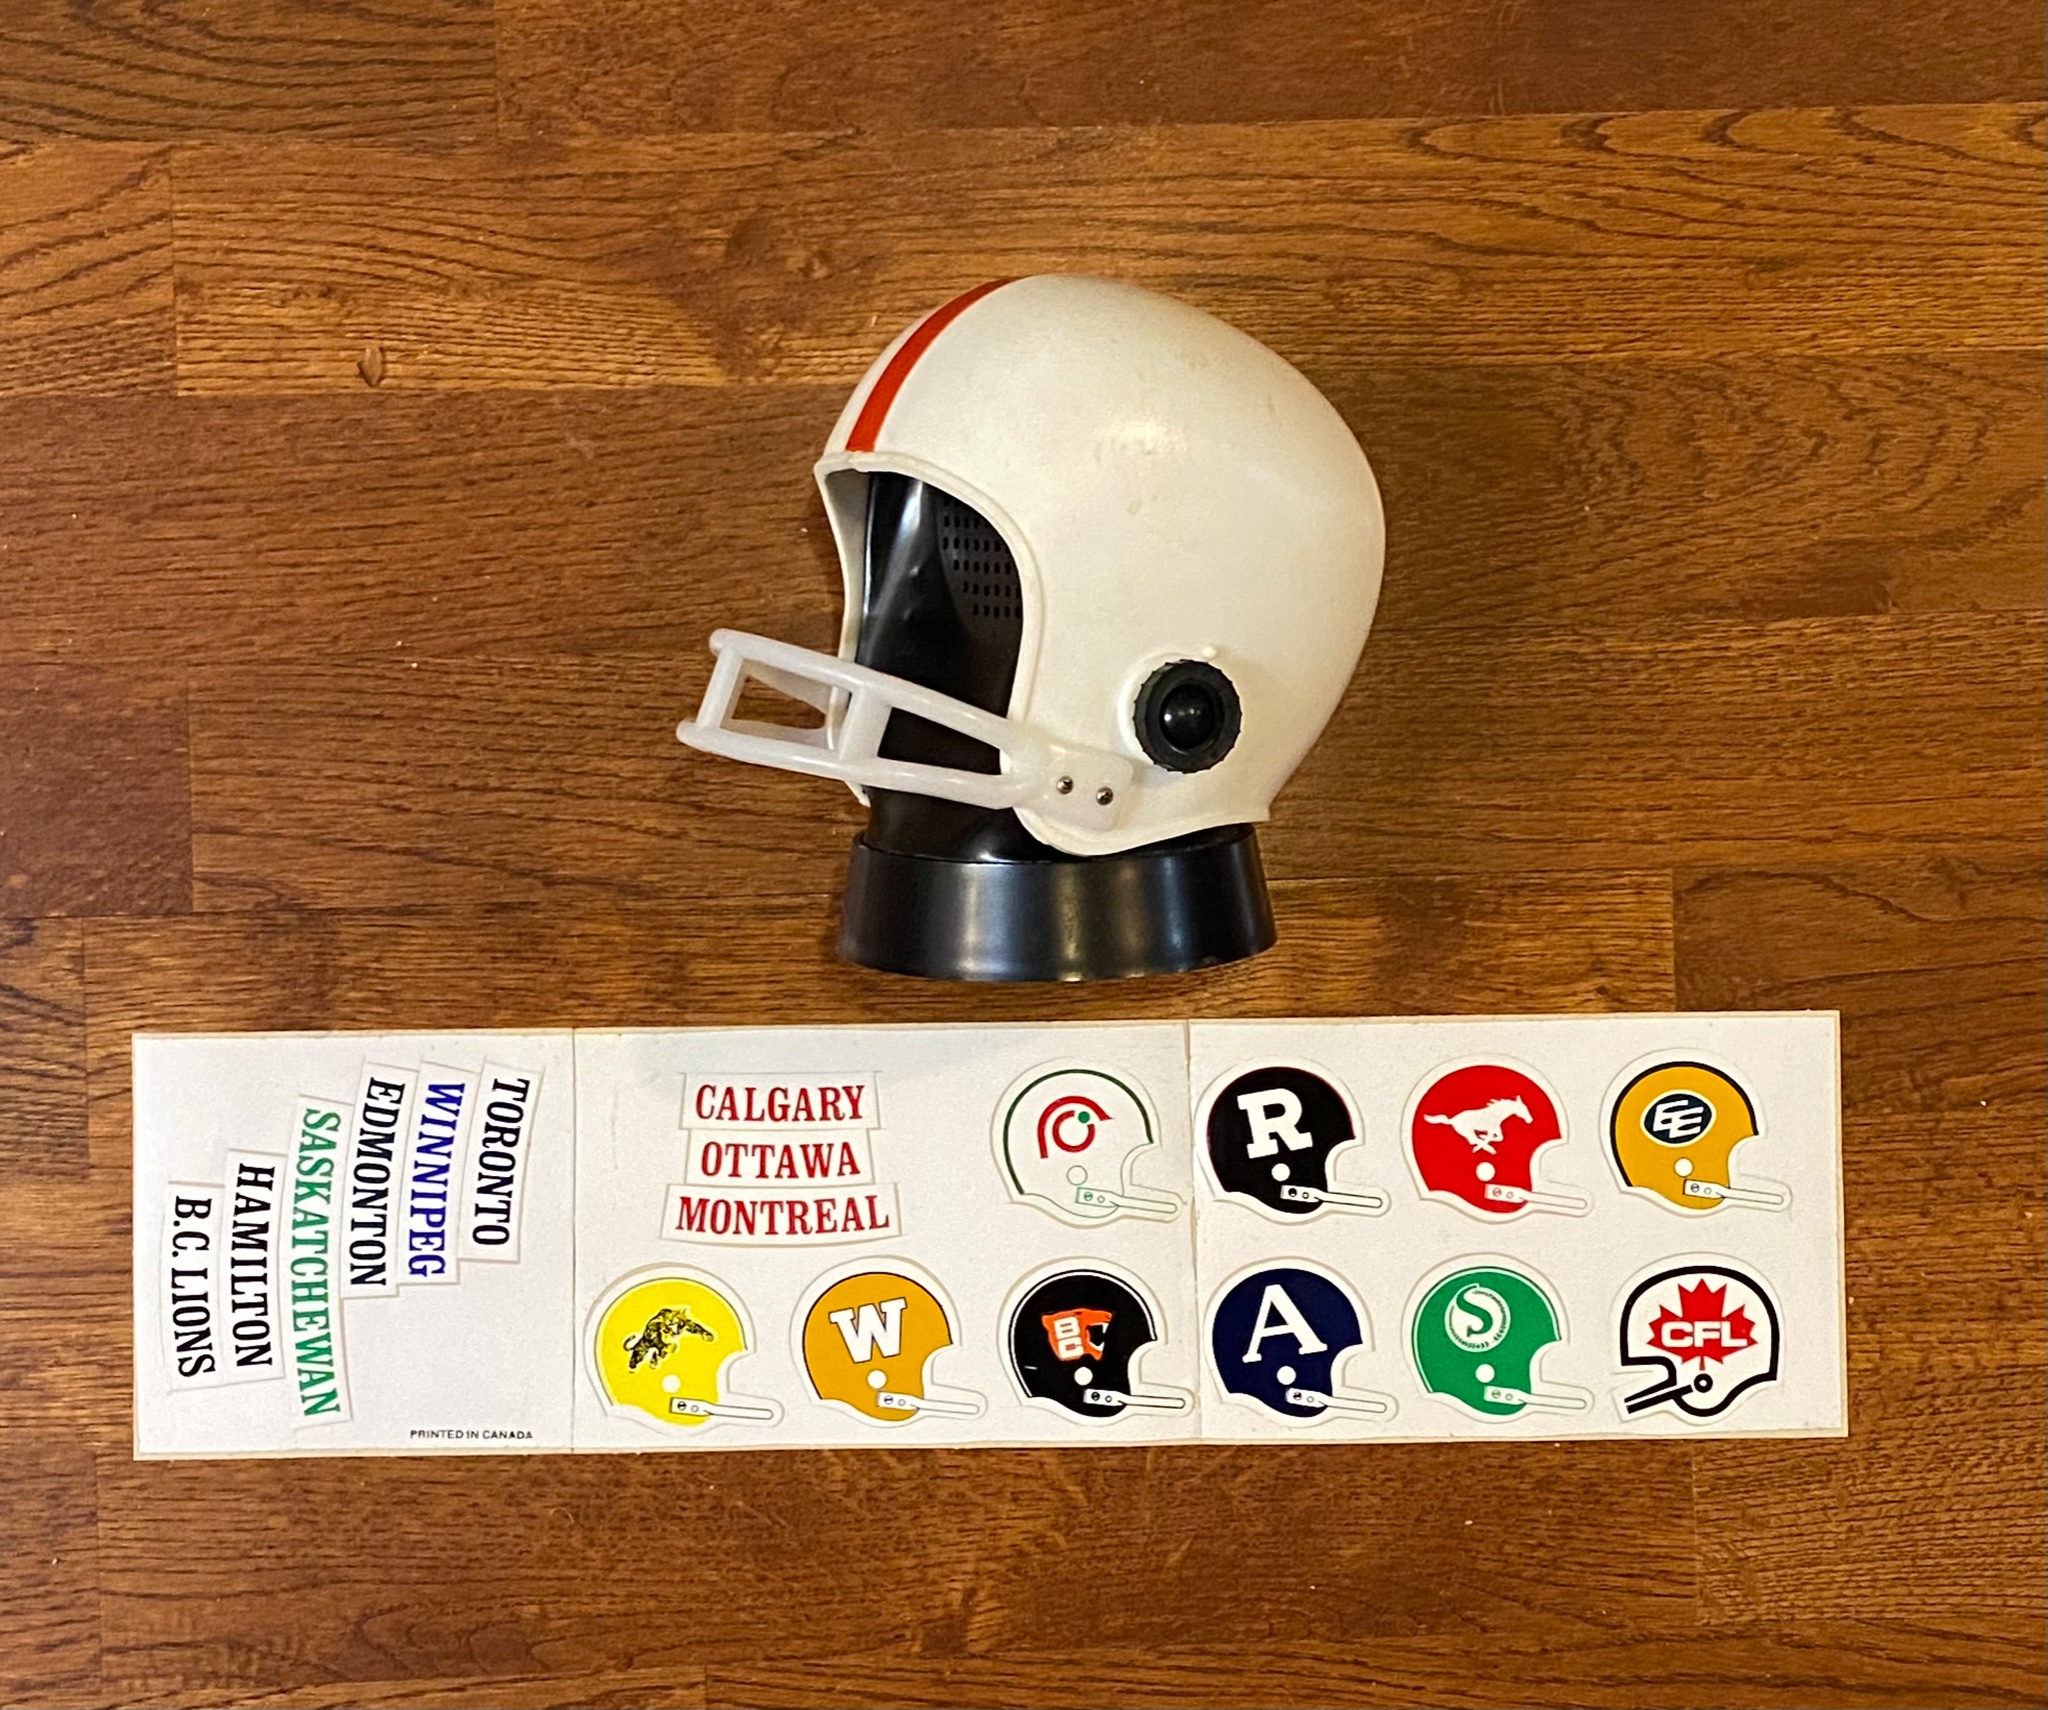 Daryl Slade on Twitter: "Here I have an early 1970s football helmet radio  with sheet of stickers of each of the 9 CFL teams' helmet logos and city  names, plus the original